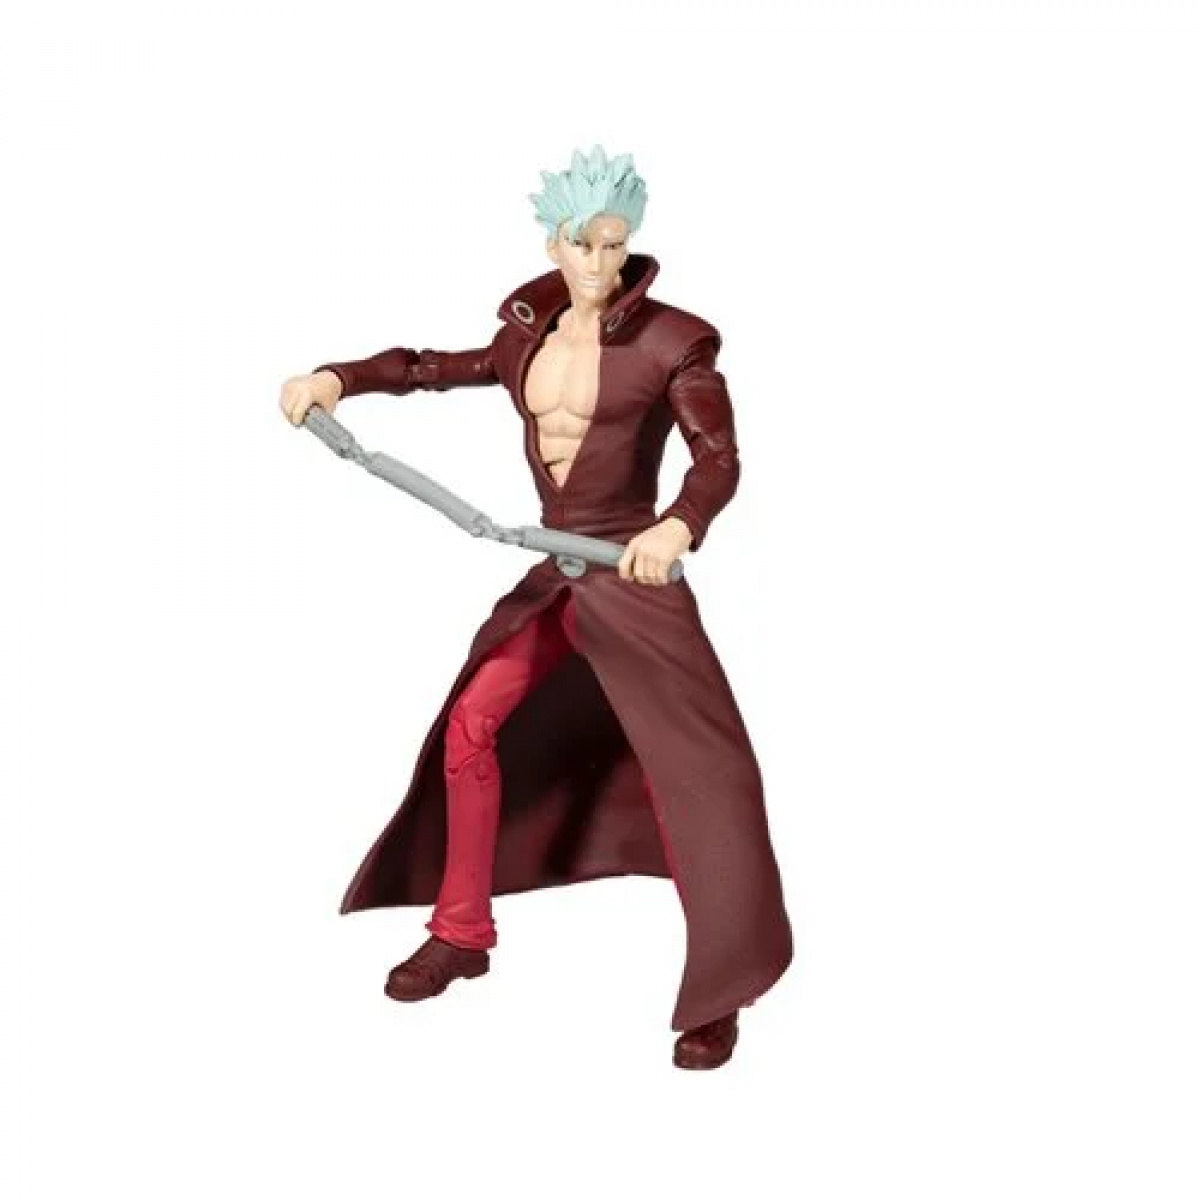 Shop The Seven Deadly Sins Wave 1 Ban 7-Inch Scale Action Figure anime